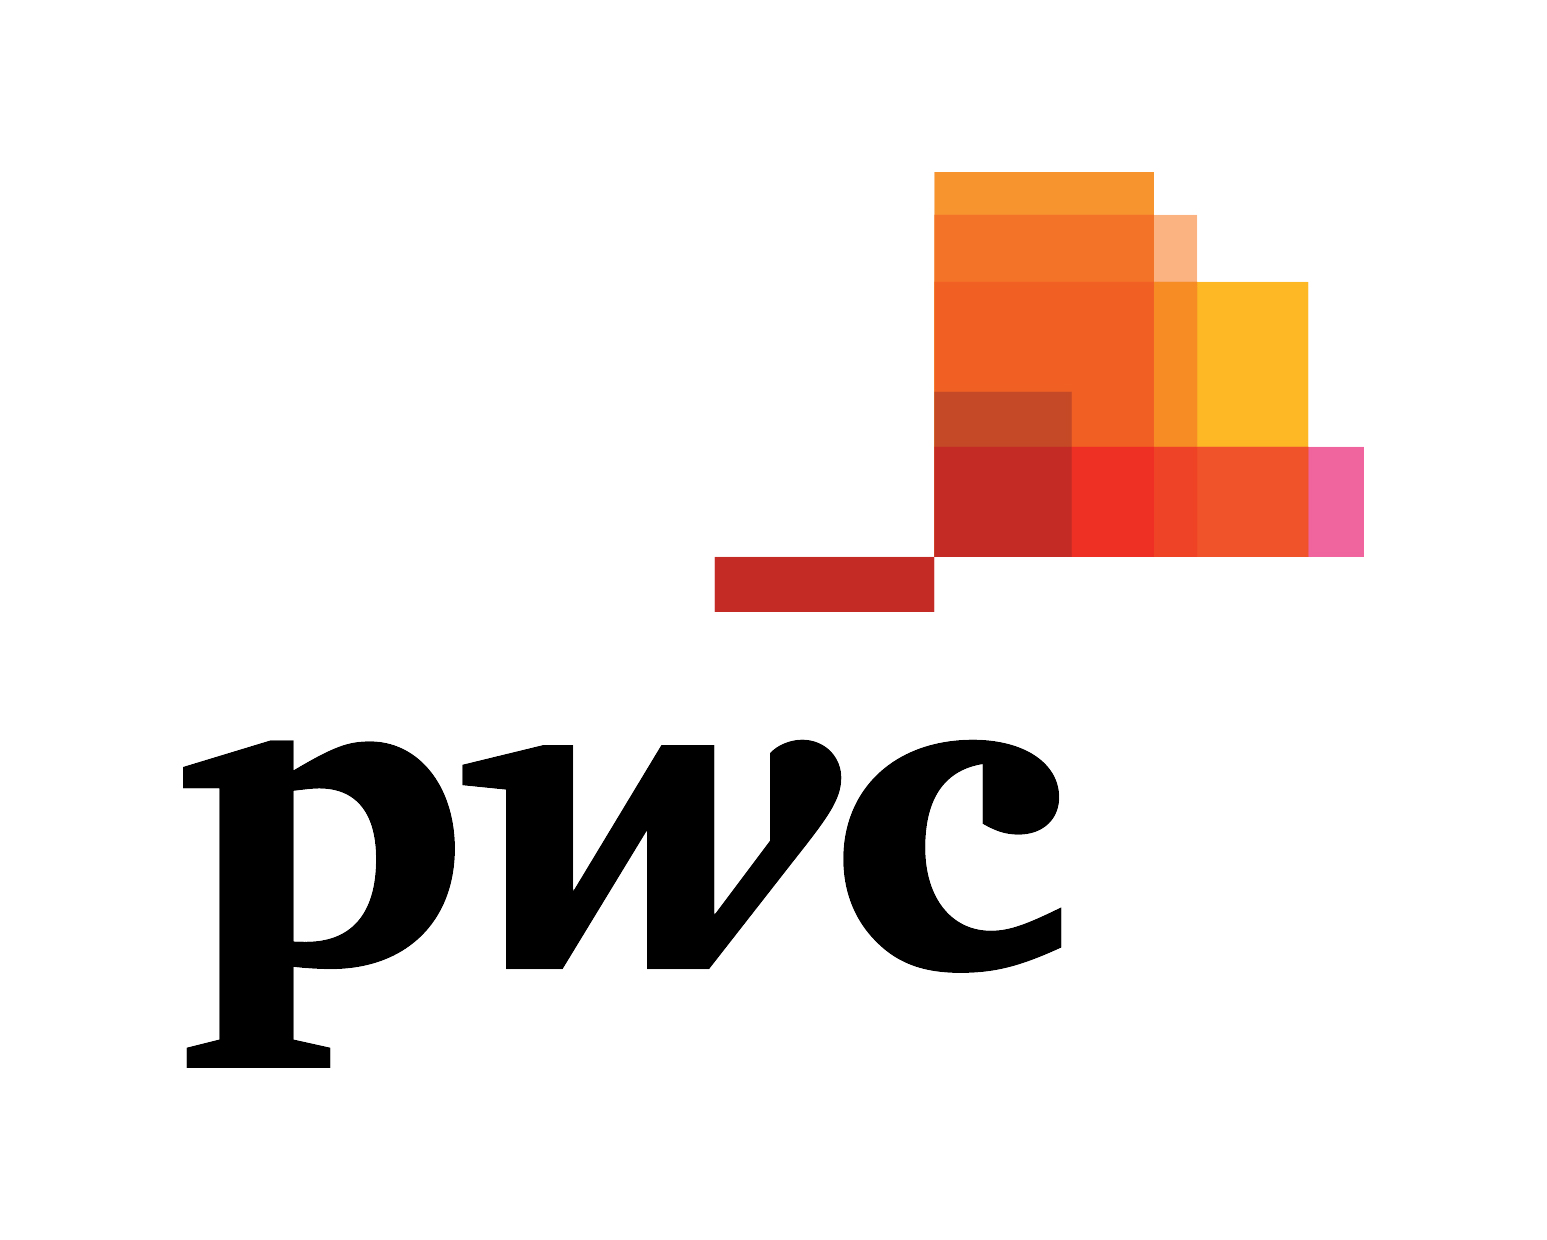 PwC Colour with clear space.jpg